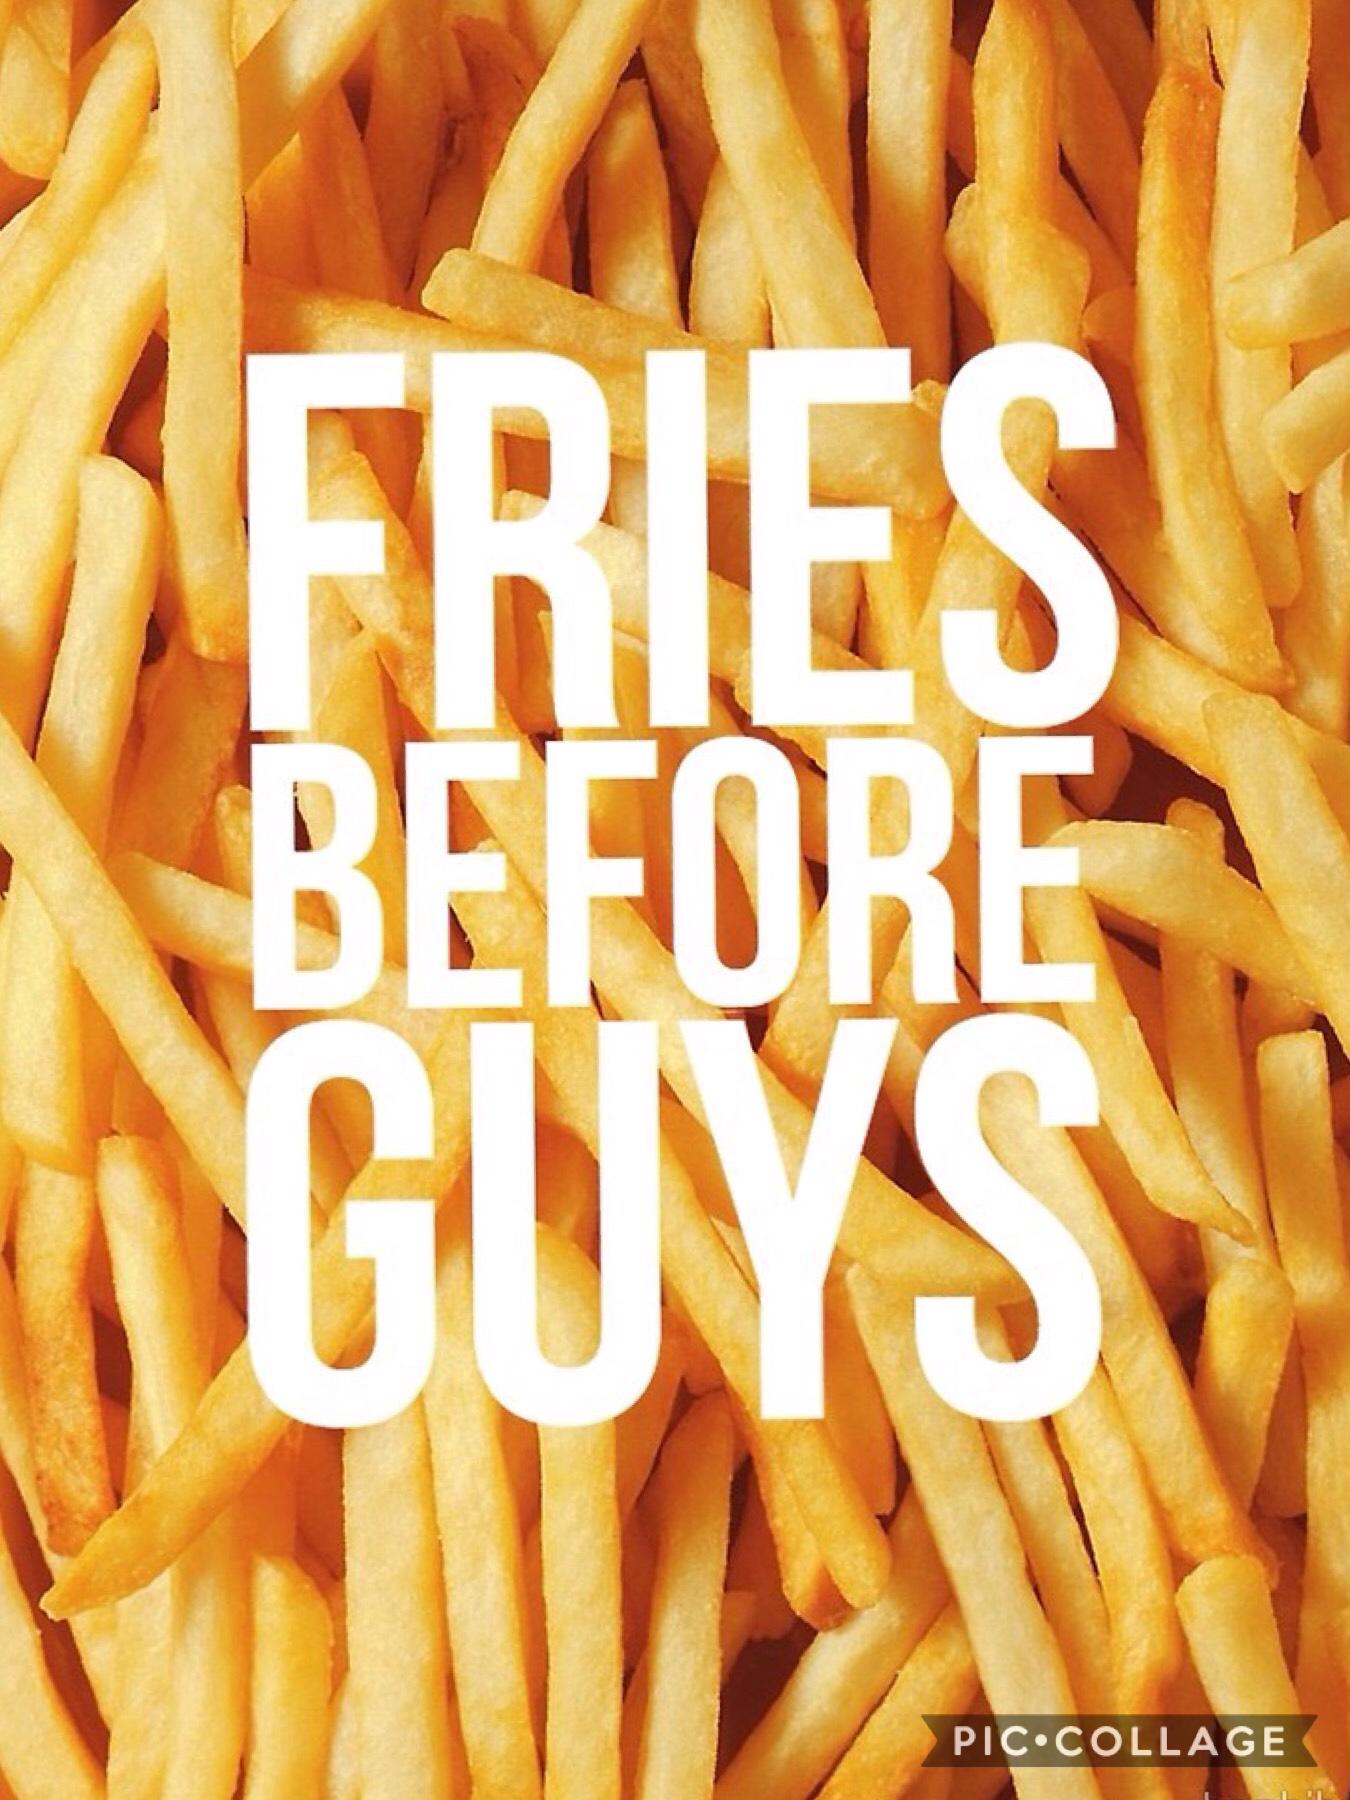 I'd pick food over a dude, and fries always come before guys 😋😋😆😆